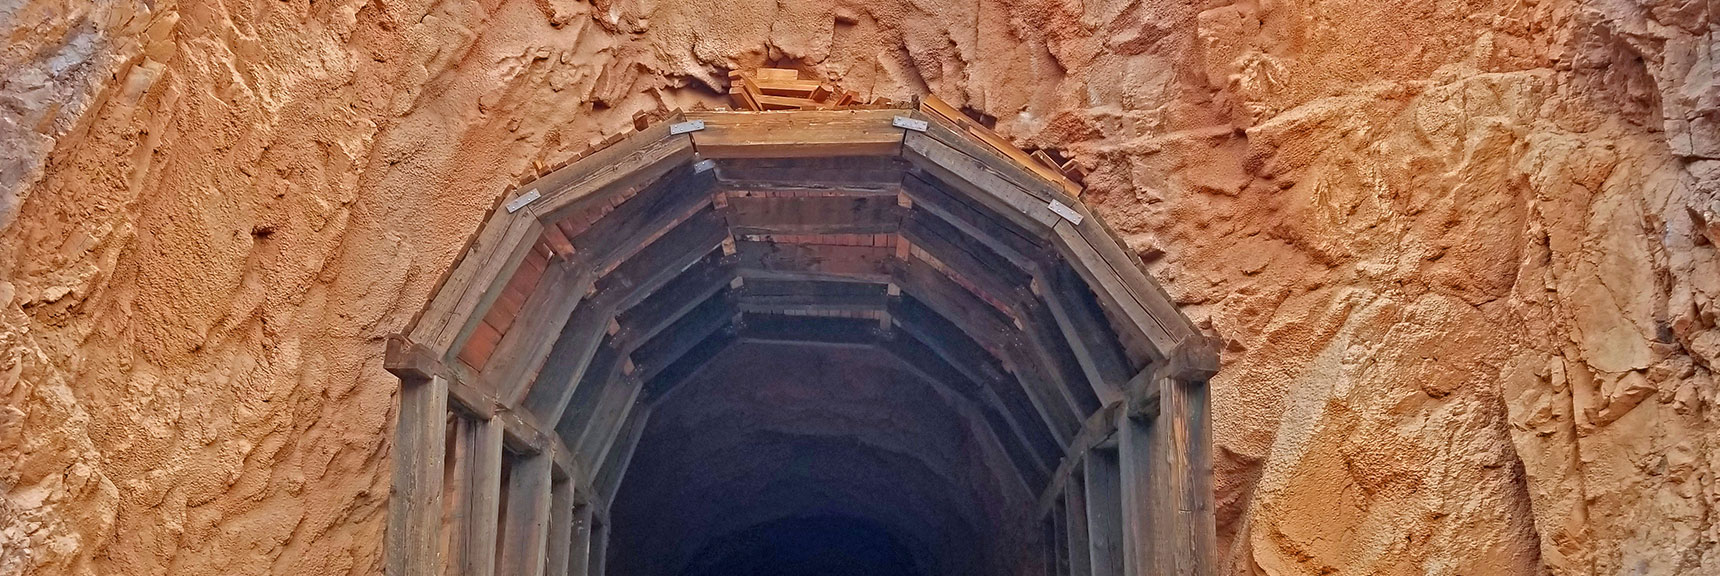 Timber Support Beams in the Tunnels. Burned and Replaced in 1990 | Historic Railroad Trail | Lake Mead National Recreation Area, Nevada